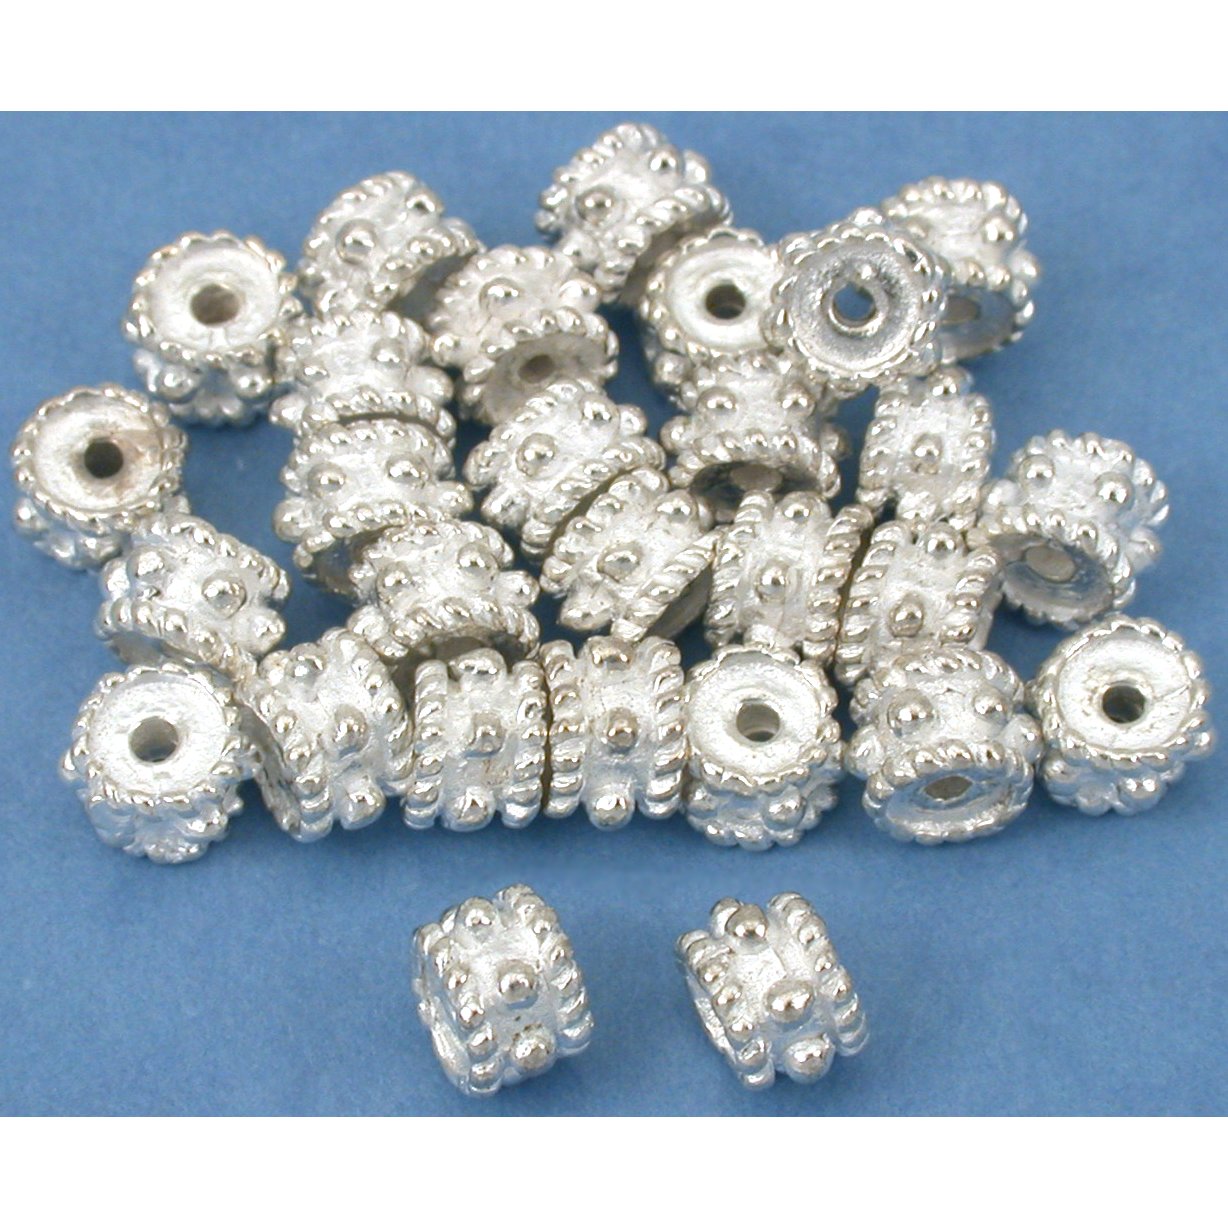 Bali Spacer Rope Beads Silver Plated 6mm 25Pcs Approx.